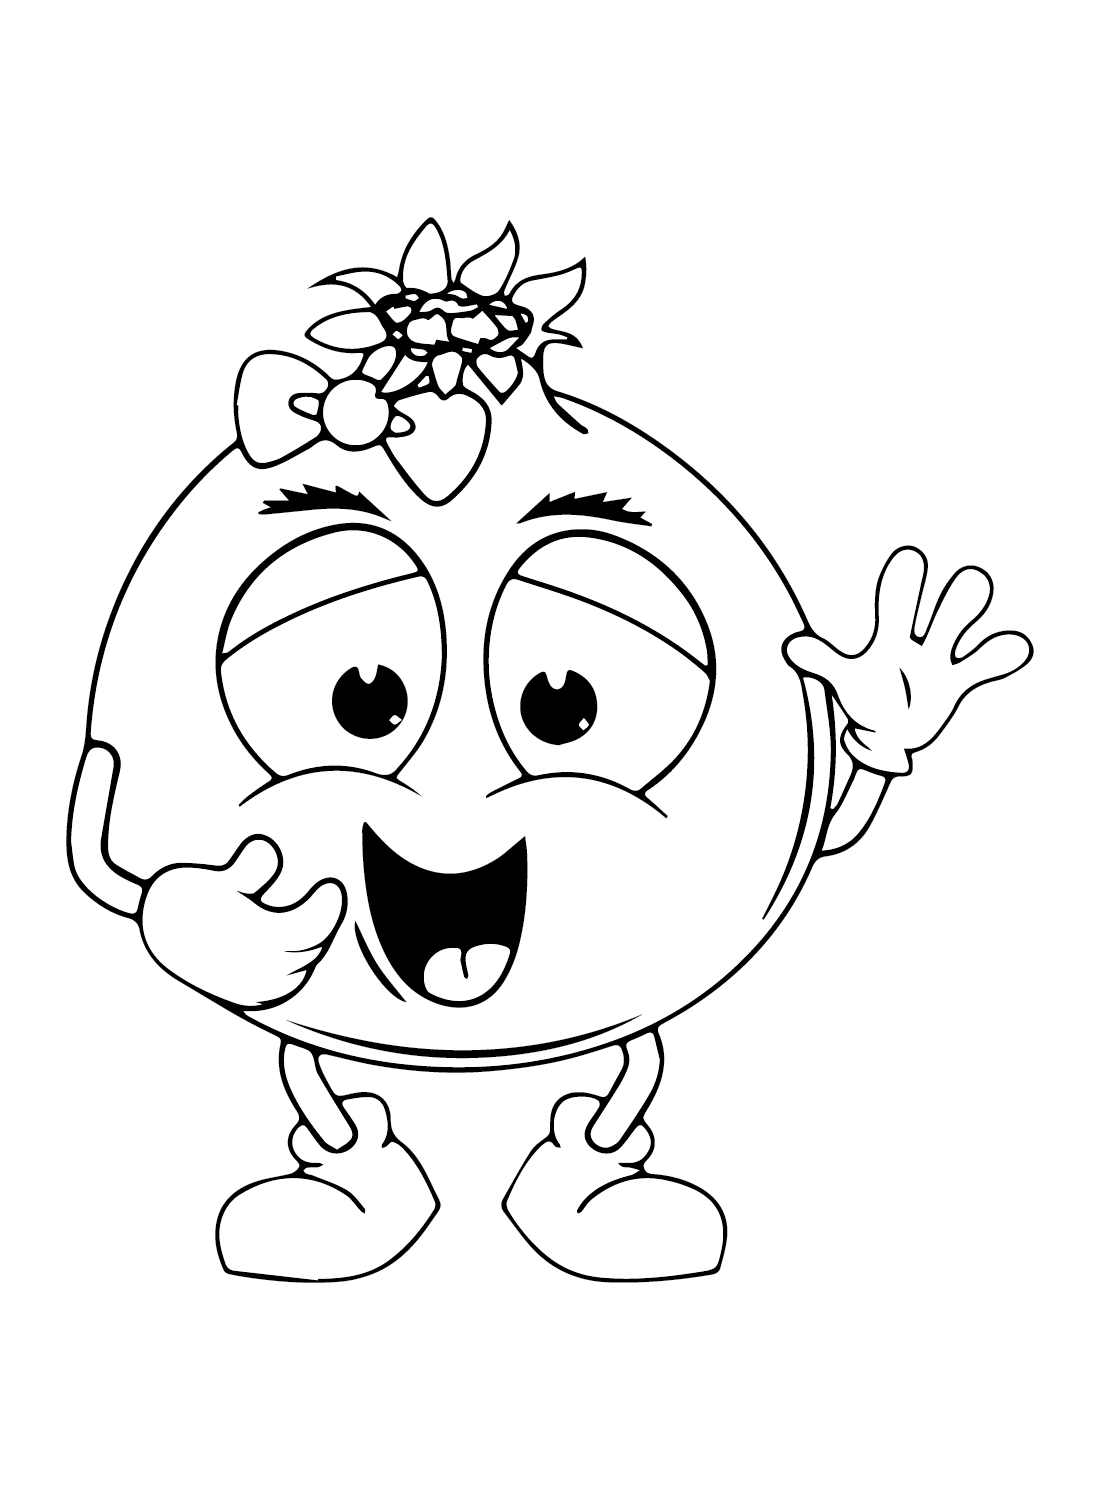 Pomegranate Cute Coloring Page